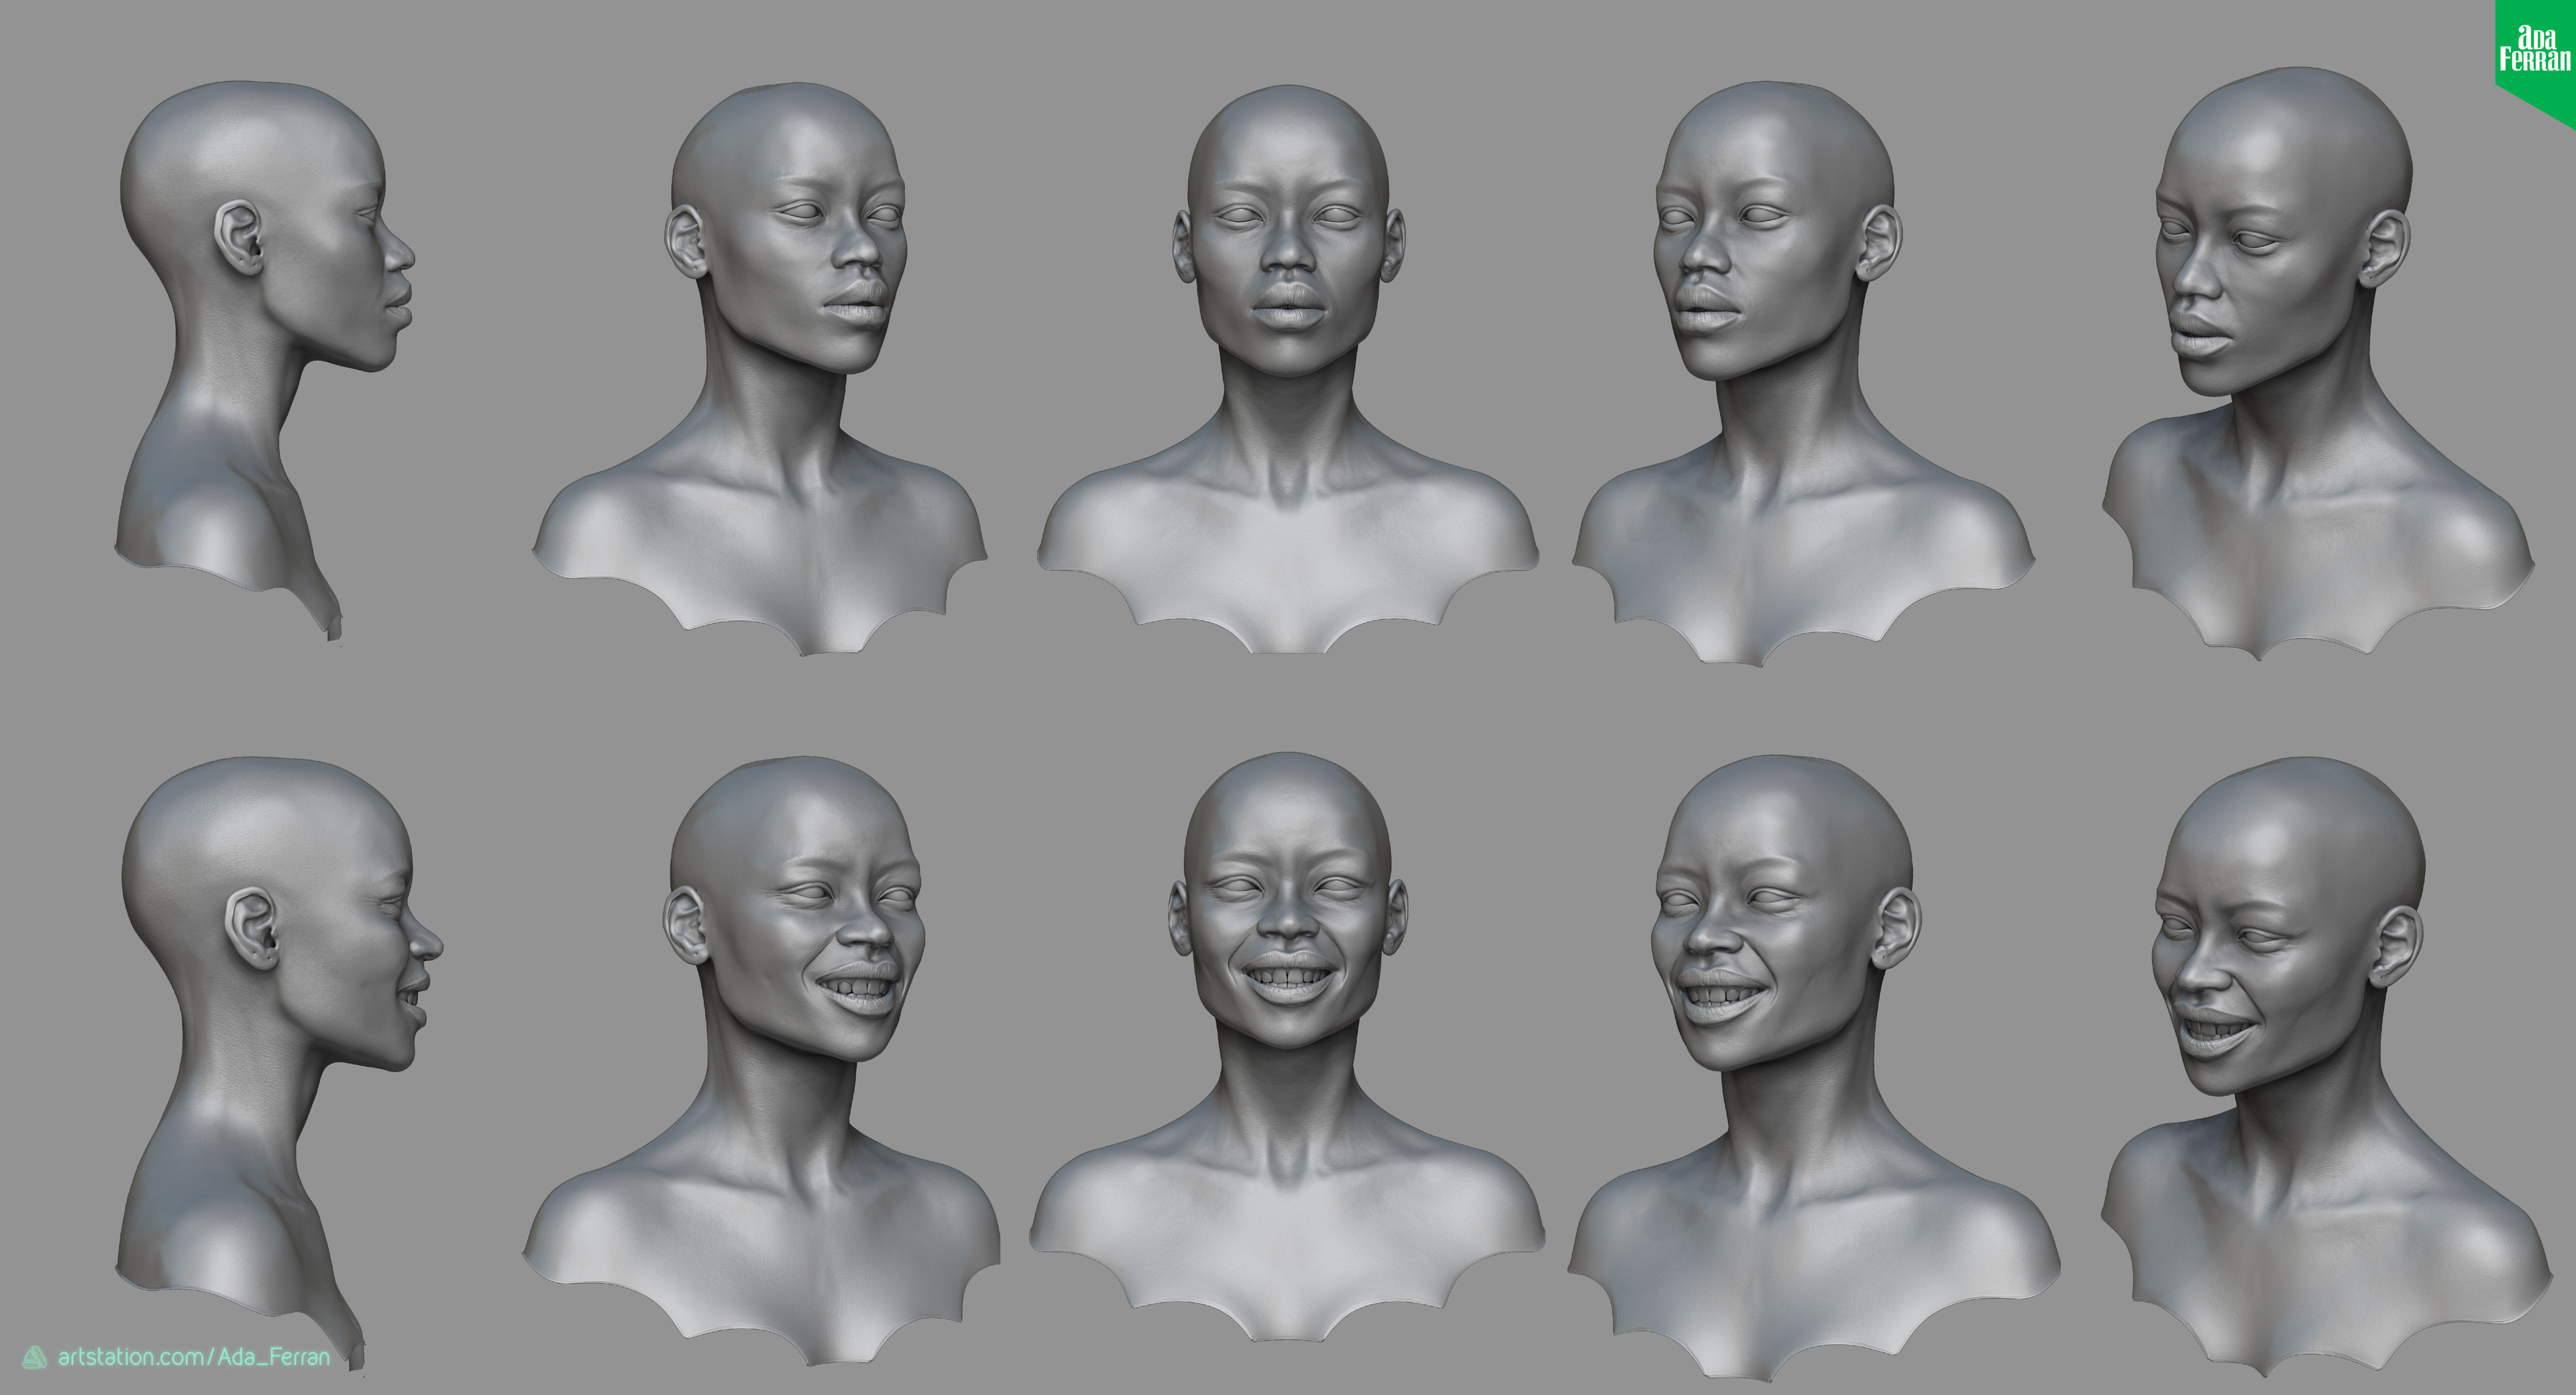 Sculpt views for serious and smiling attitudes. Same low poly mesh, but different normal maps.